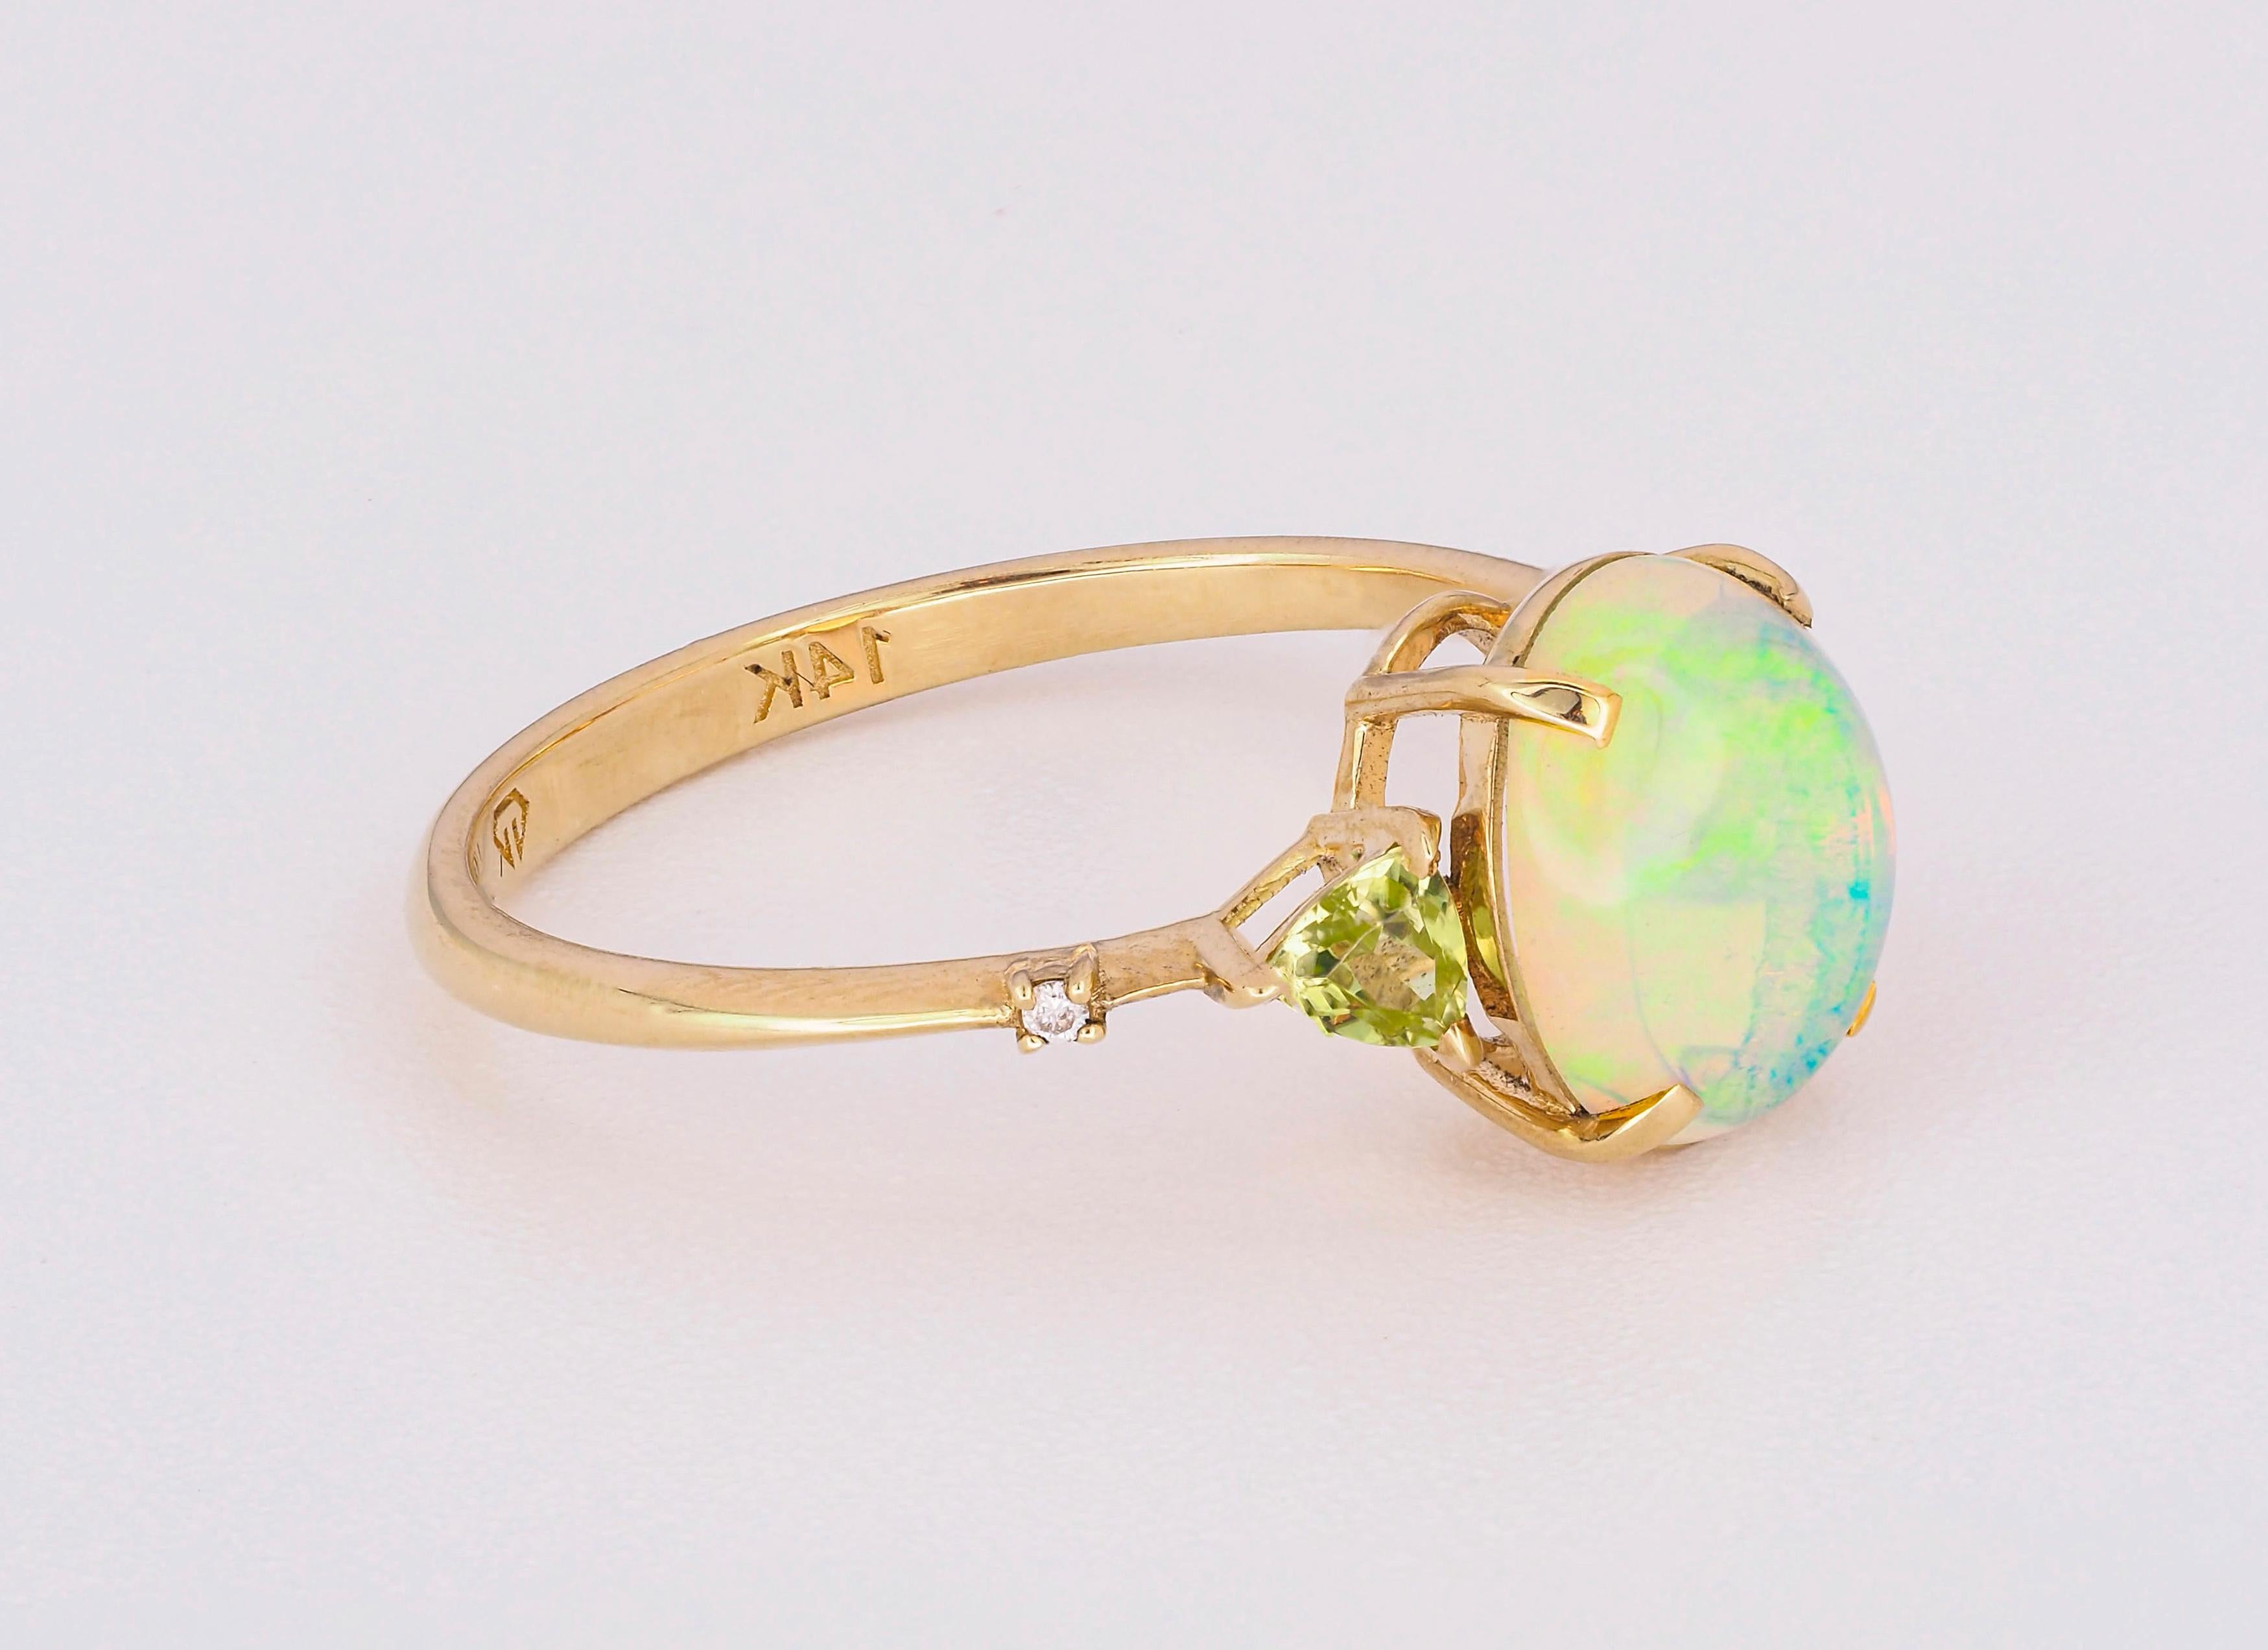 For Sale:  14k Gold Ring with Opal, Diamonds and Peridots 4